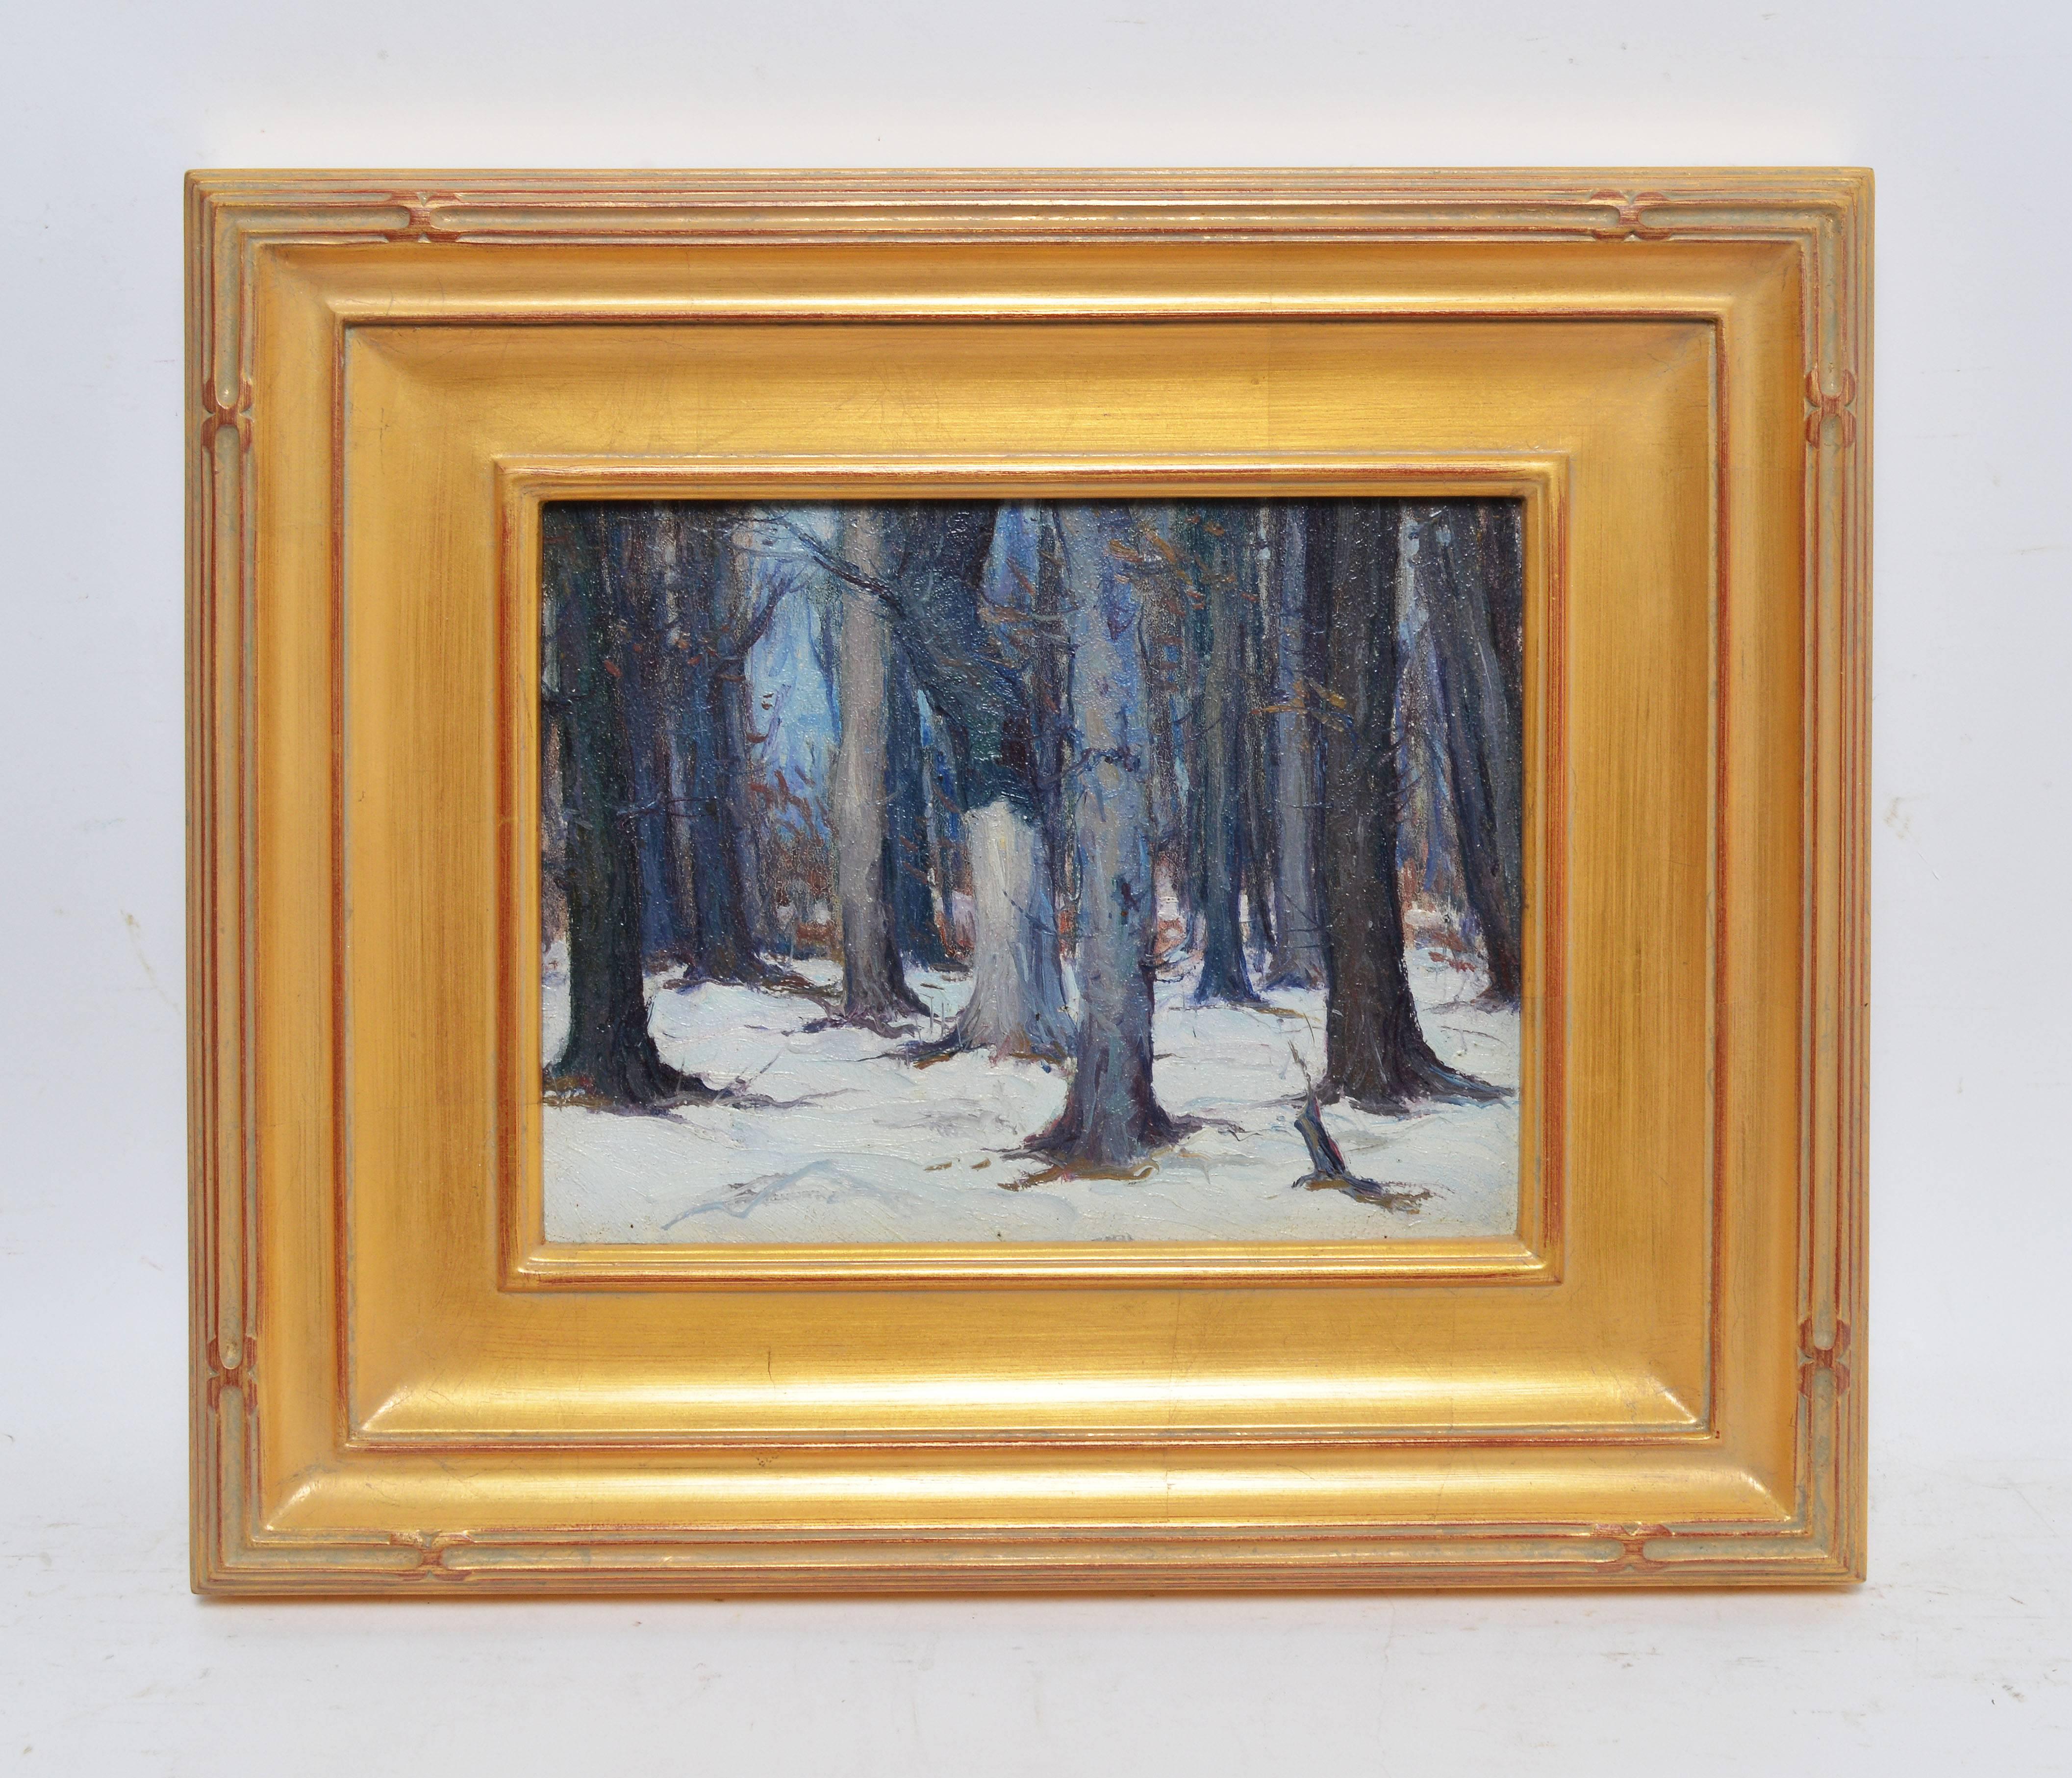 Impressionist winter landscape with a forest view by George Renouard  (1885 - 1954).  Oil on board, circa 1910.  Unsigned.  Gallery label verso.  Image size, 10